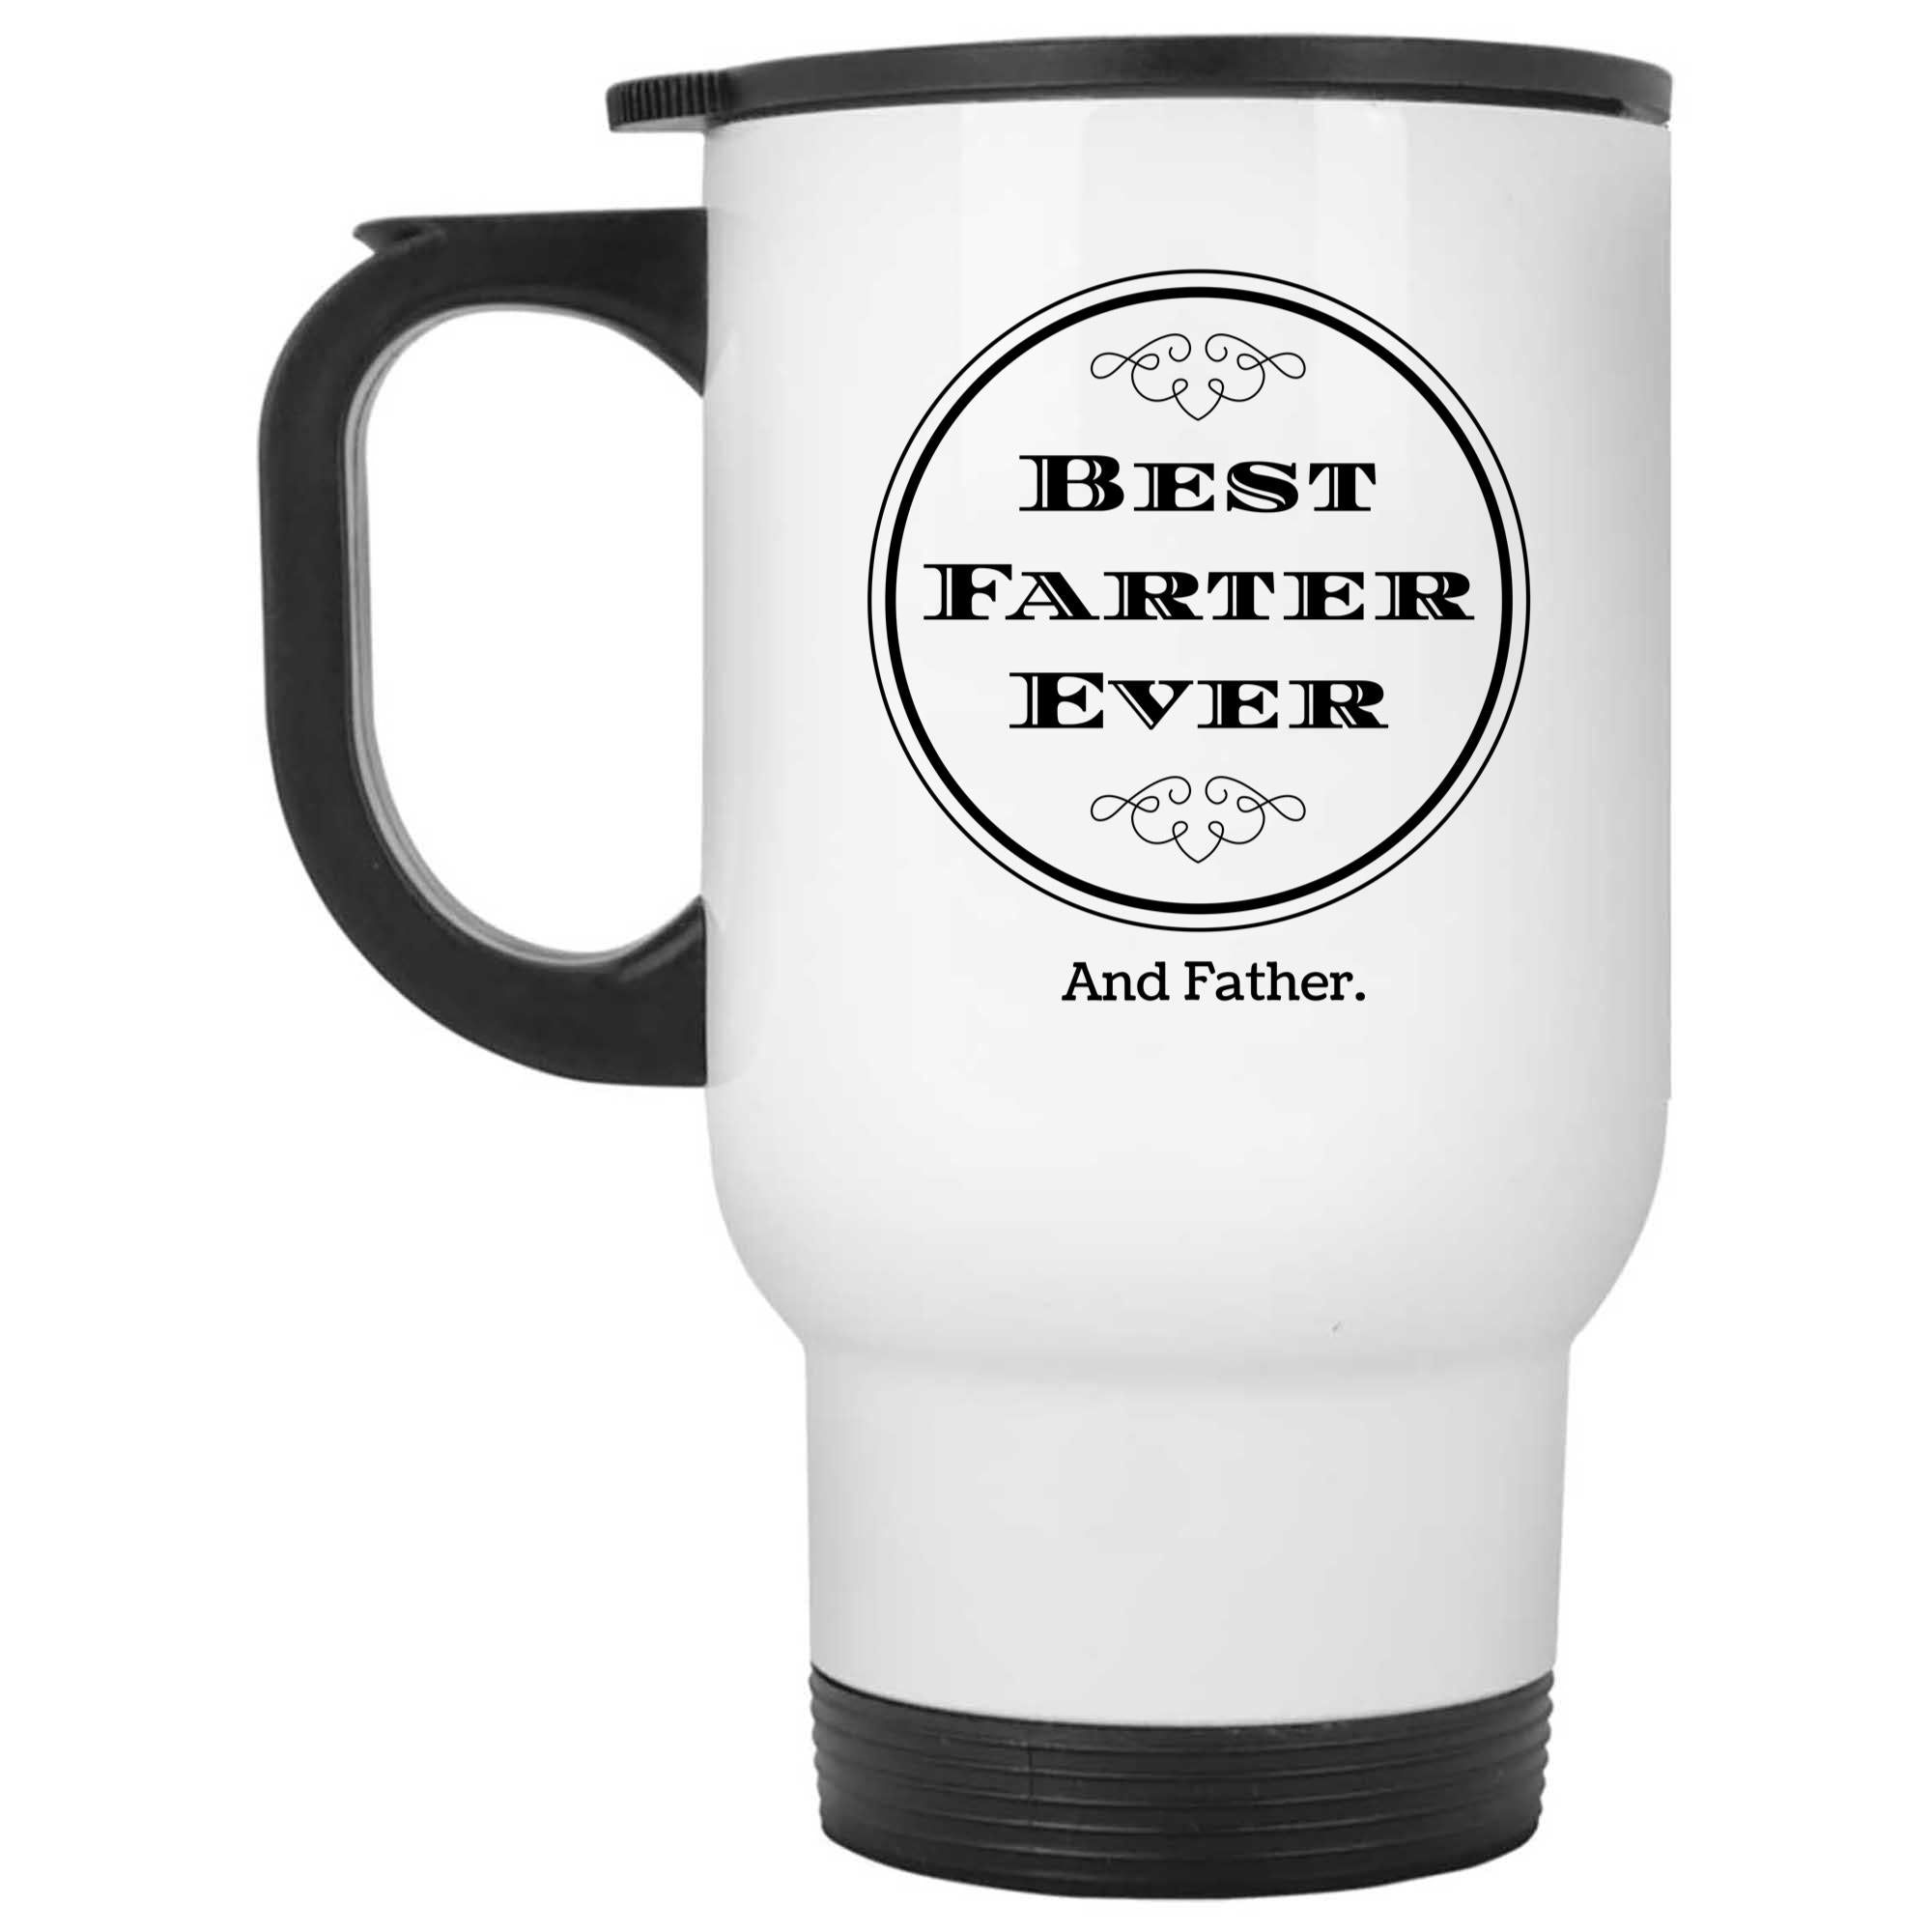 Skitongifts Funny Ceramic Novelty Coffee Mug Best Farter Ever And Father T1ql0xa